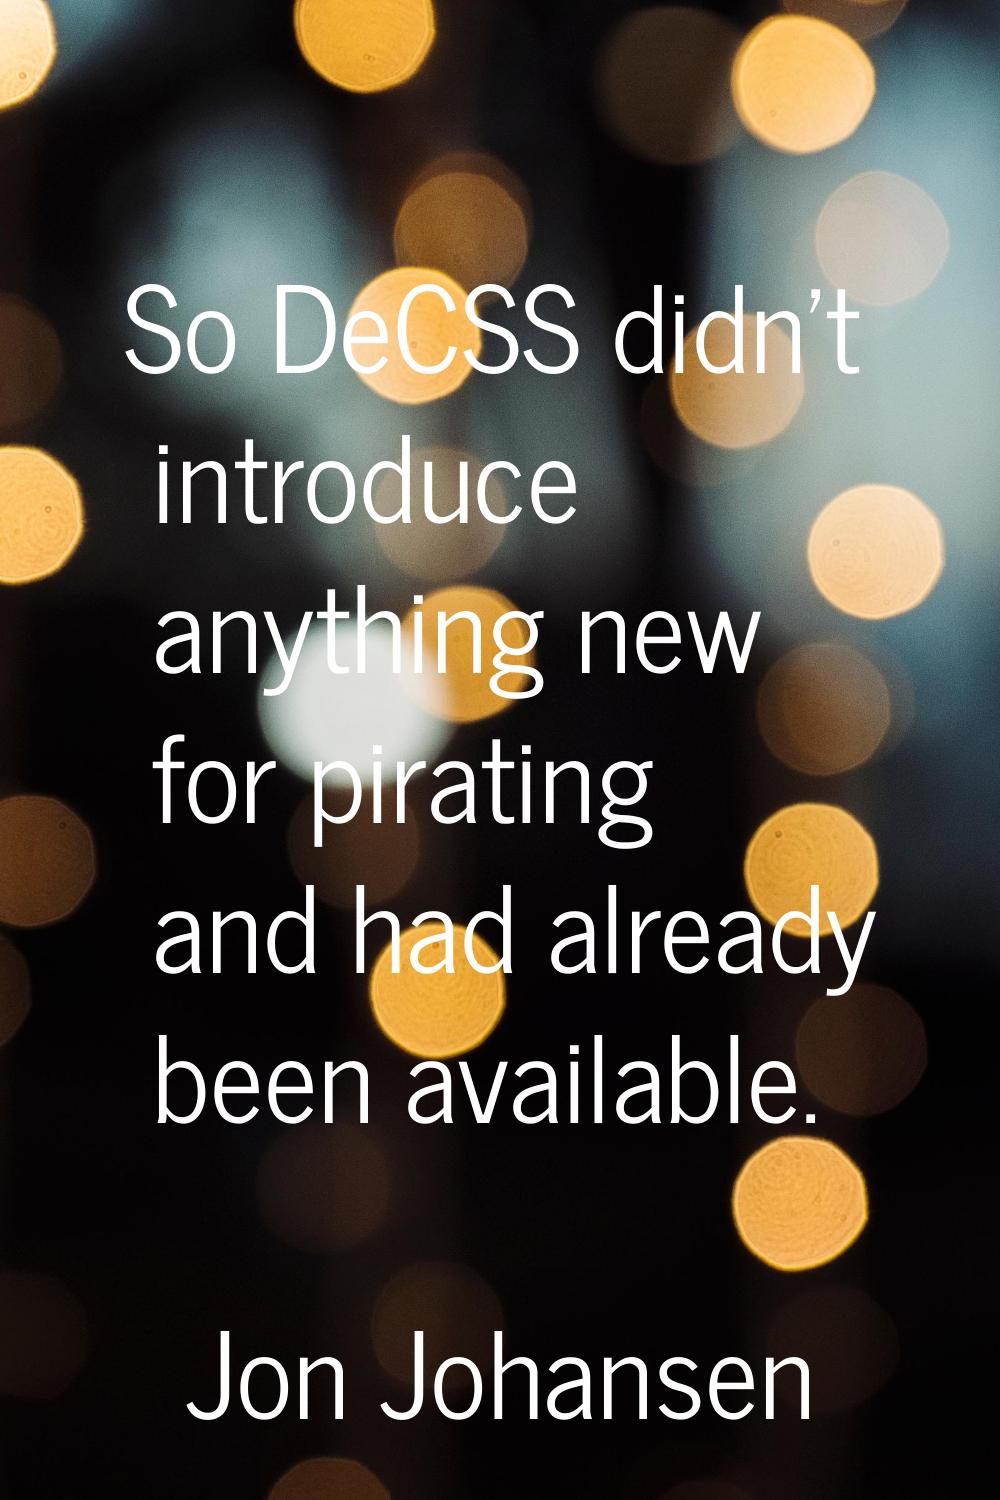 So DeCSS didn't introduce anything new for pirating and had already been available.